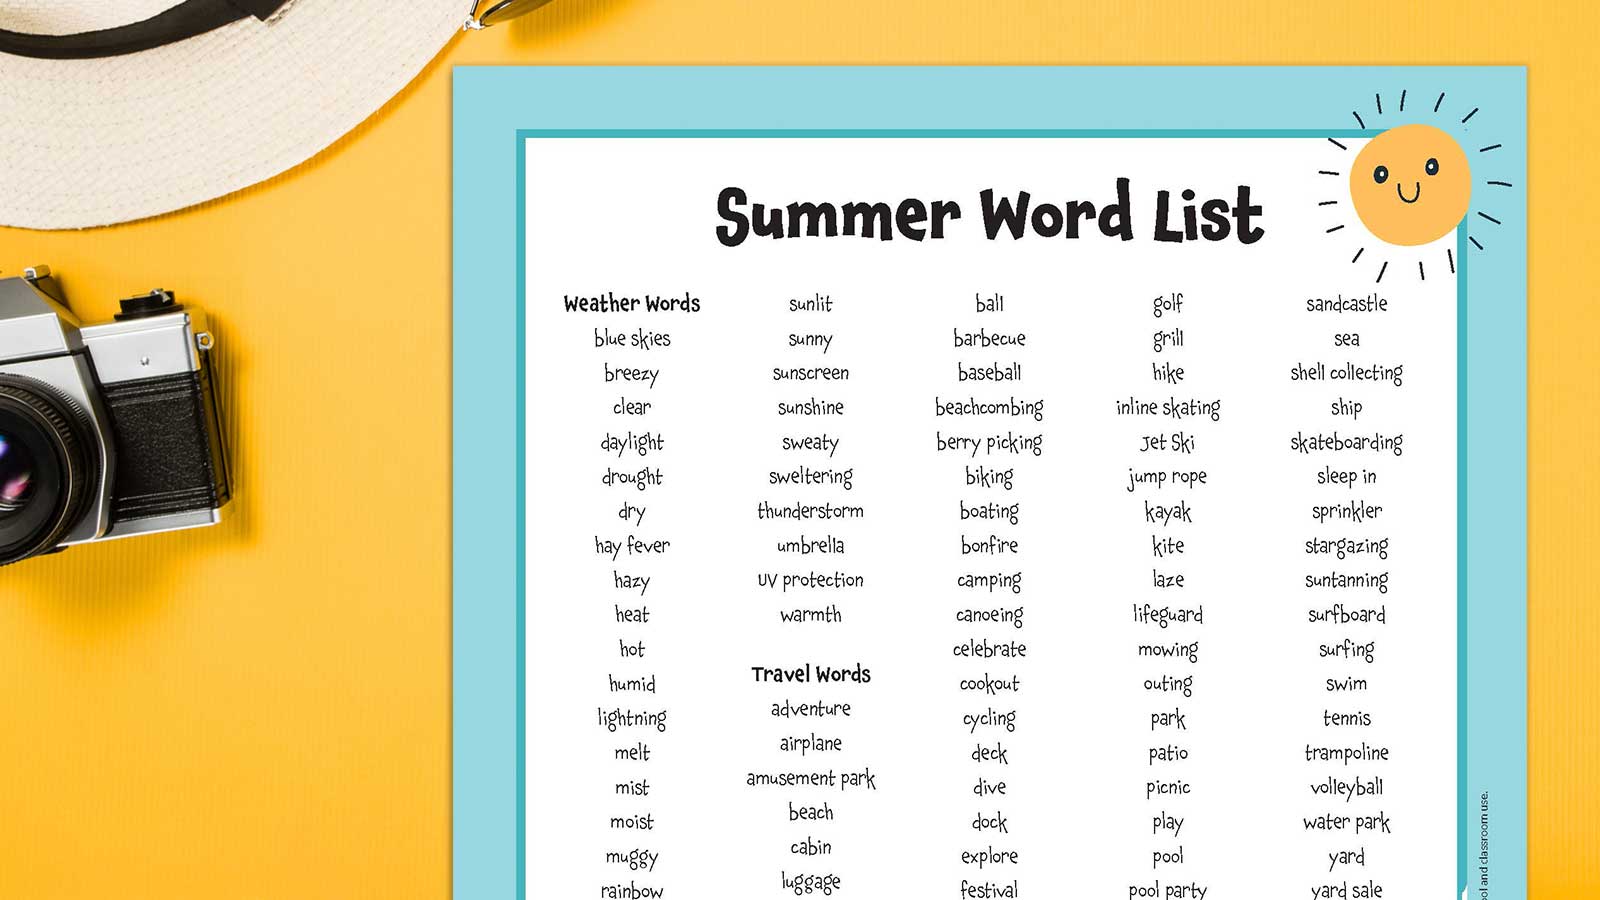 200 Summer Words for Writing, Vocab, and More (Free Printable)